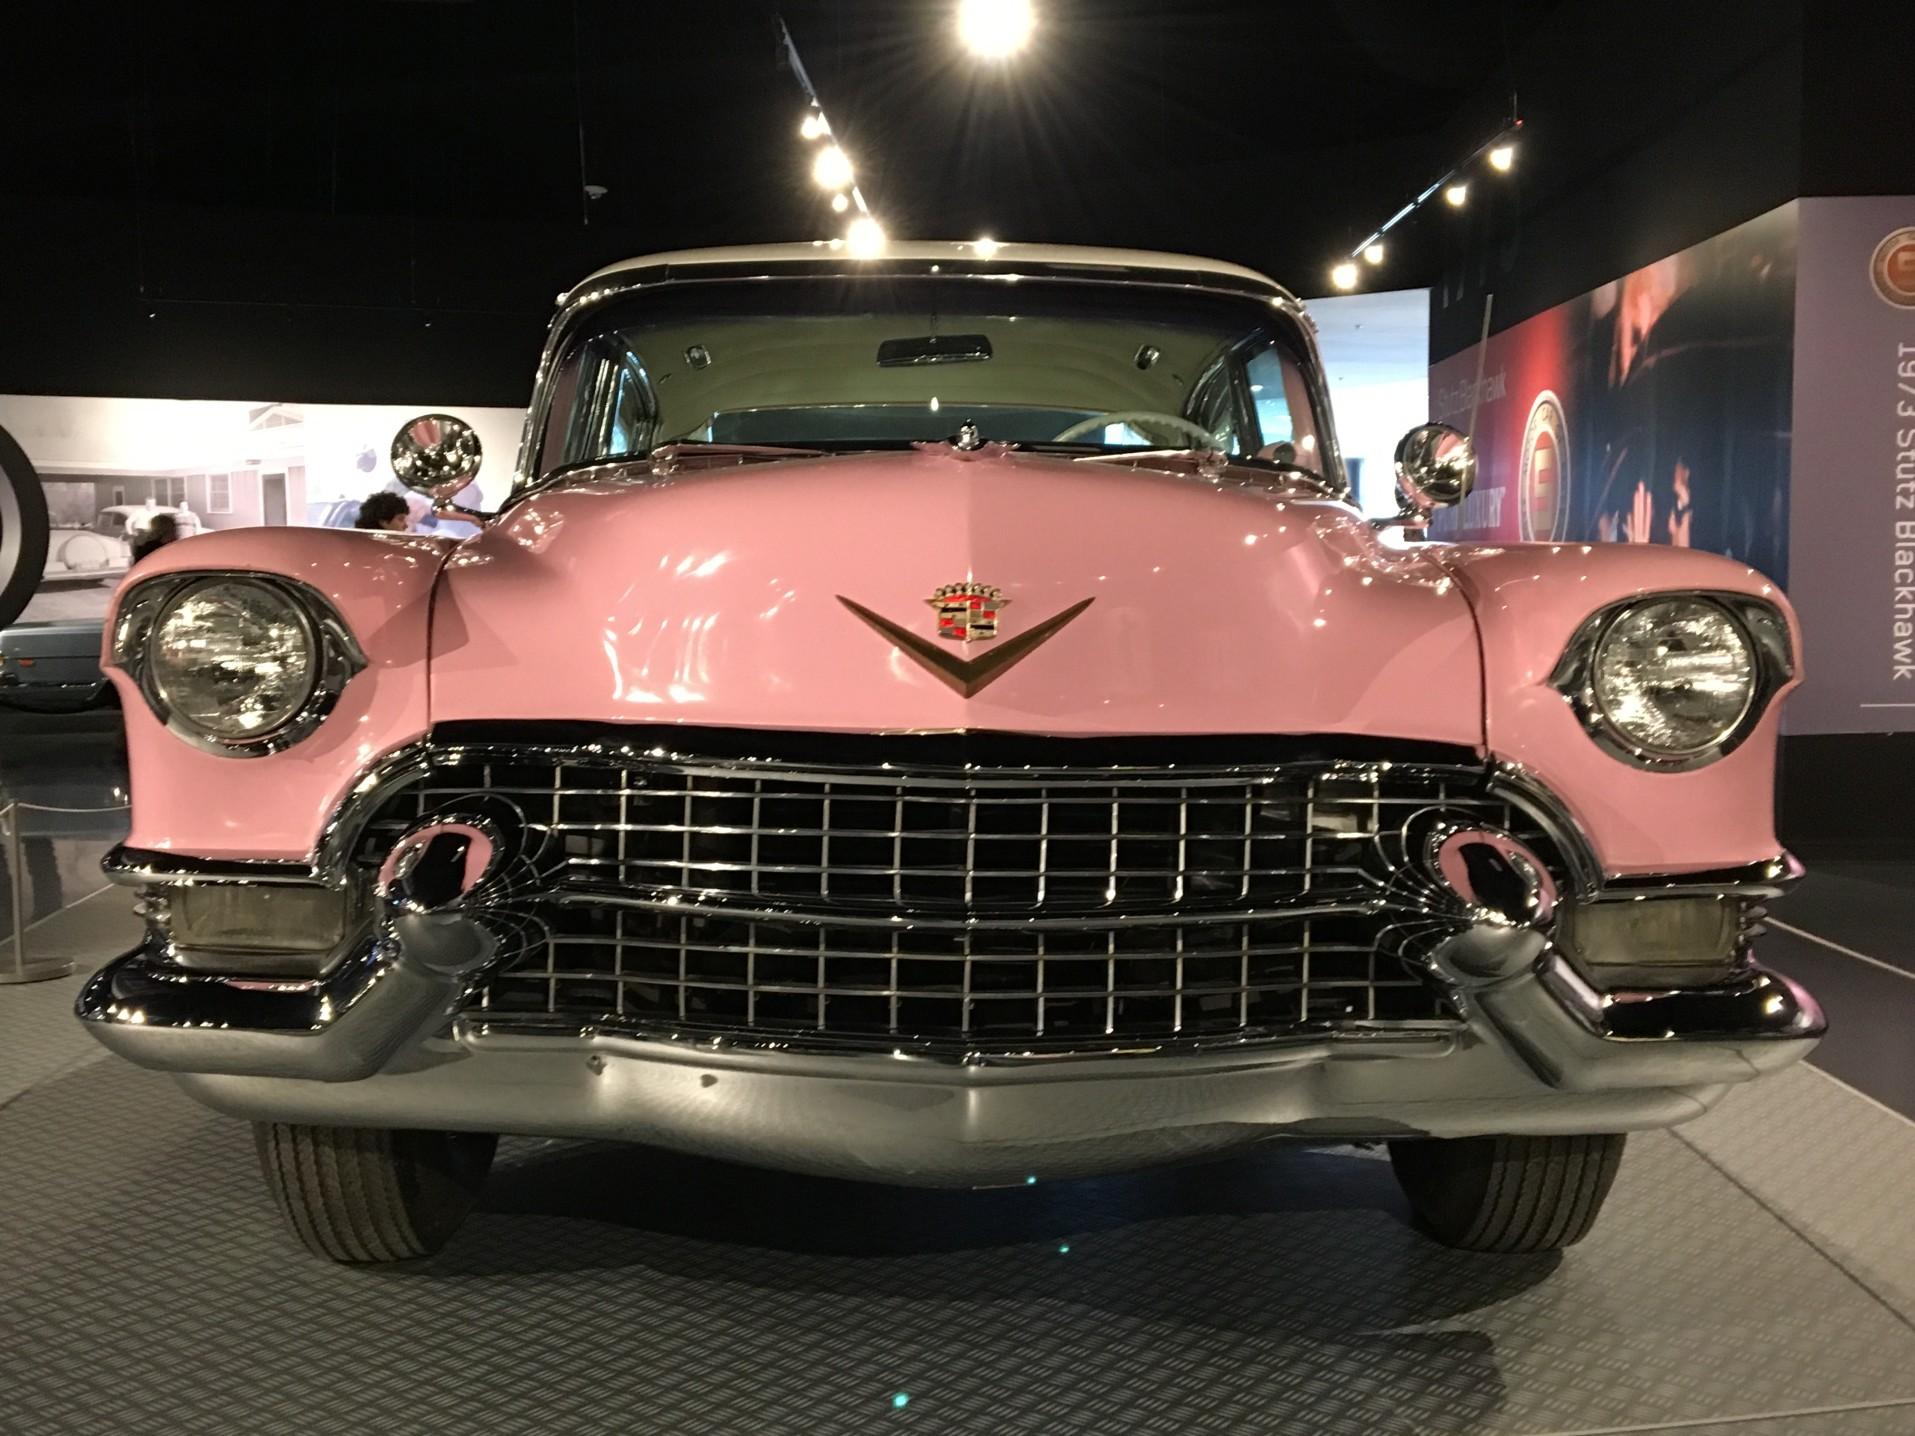 A famous Elvis Presley pink Cadillac.